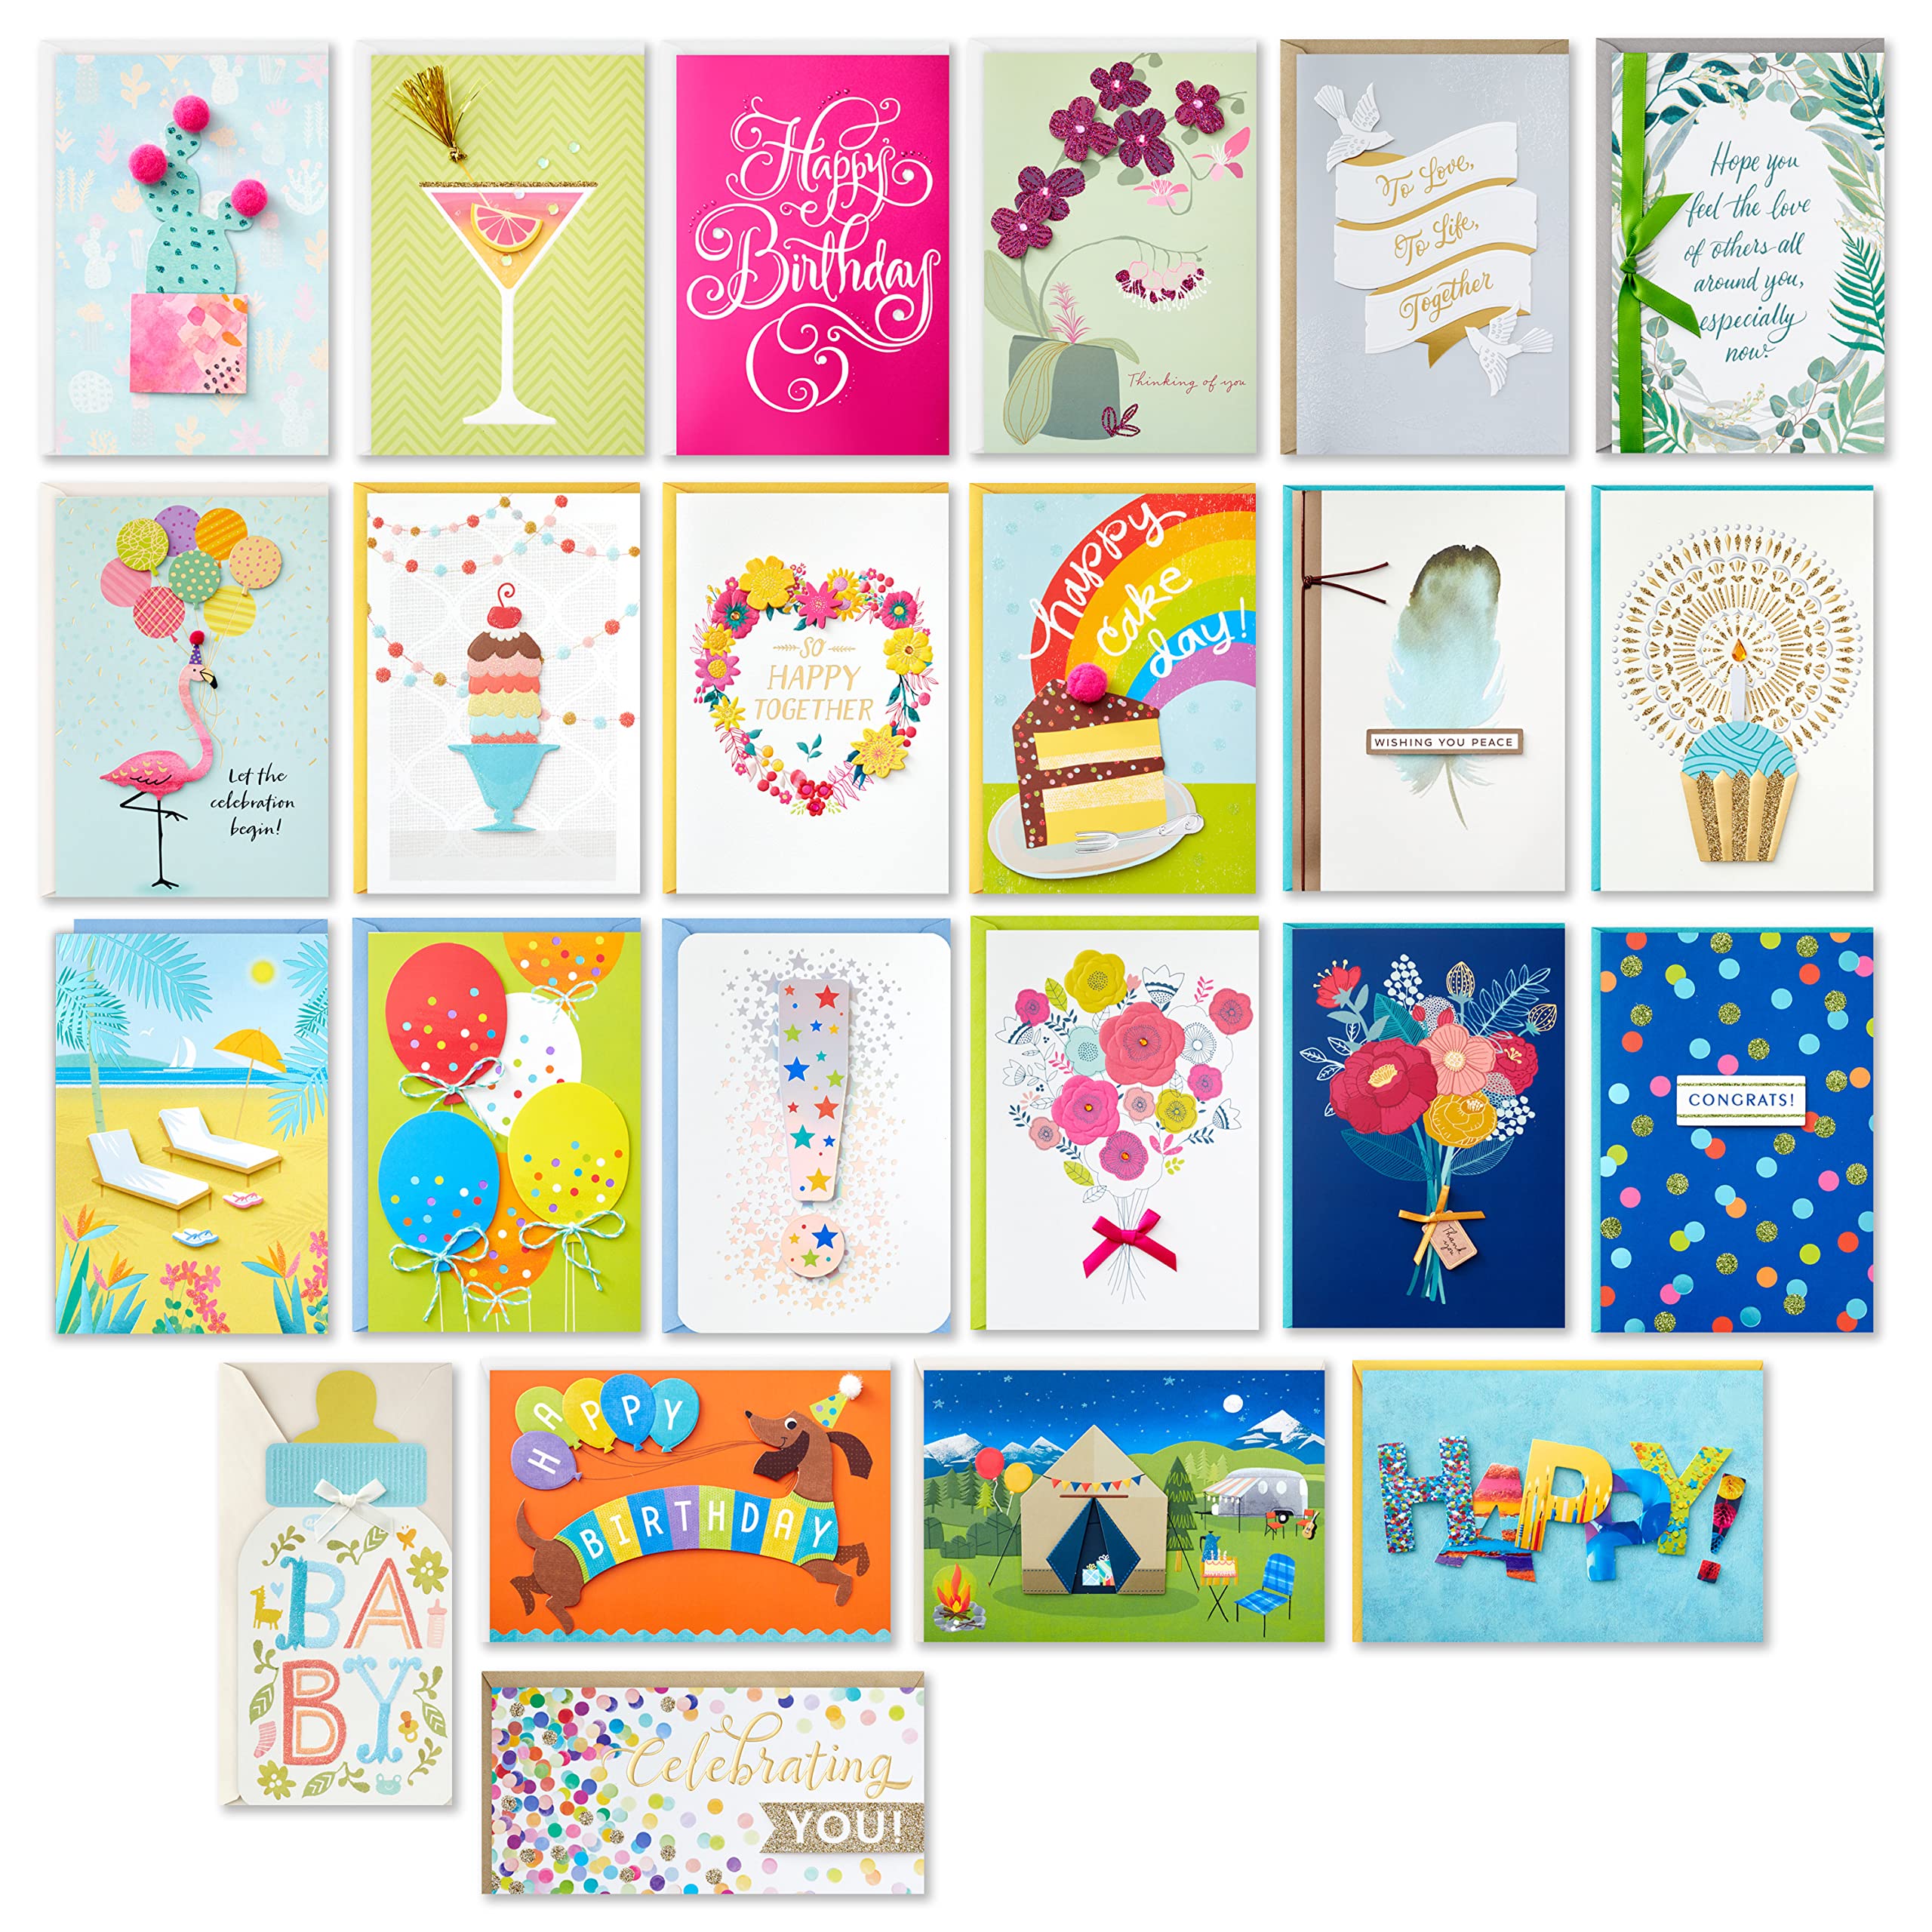 Hallmark Pack of 24 Handmade Assorted Boxed Greeting Cards, Watercolor-Birthday Cards, Baby Shower Cards, Wedding Cards, Sympathy Cards, Thinking of You Cards, Thank You Cards, Multicolor, 5EBN1002